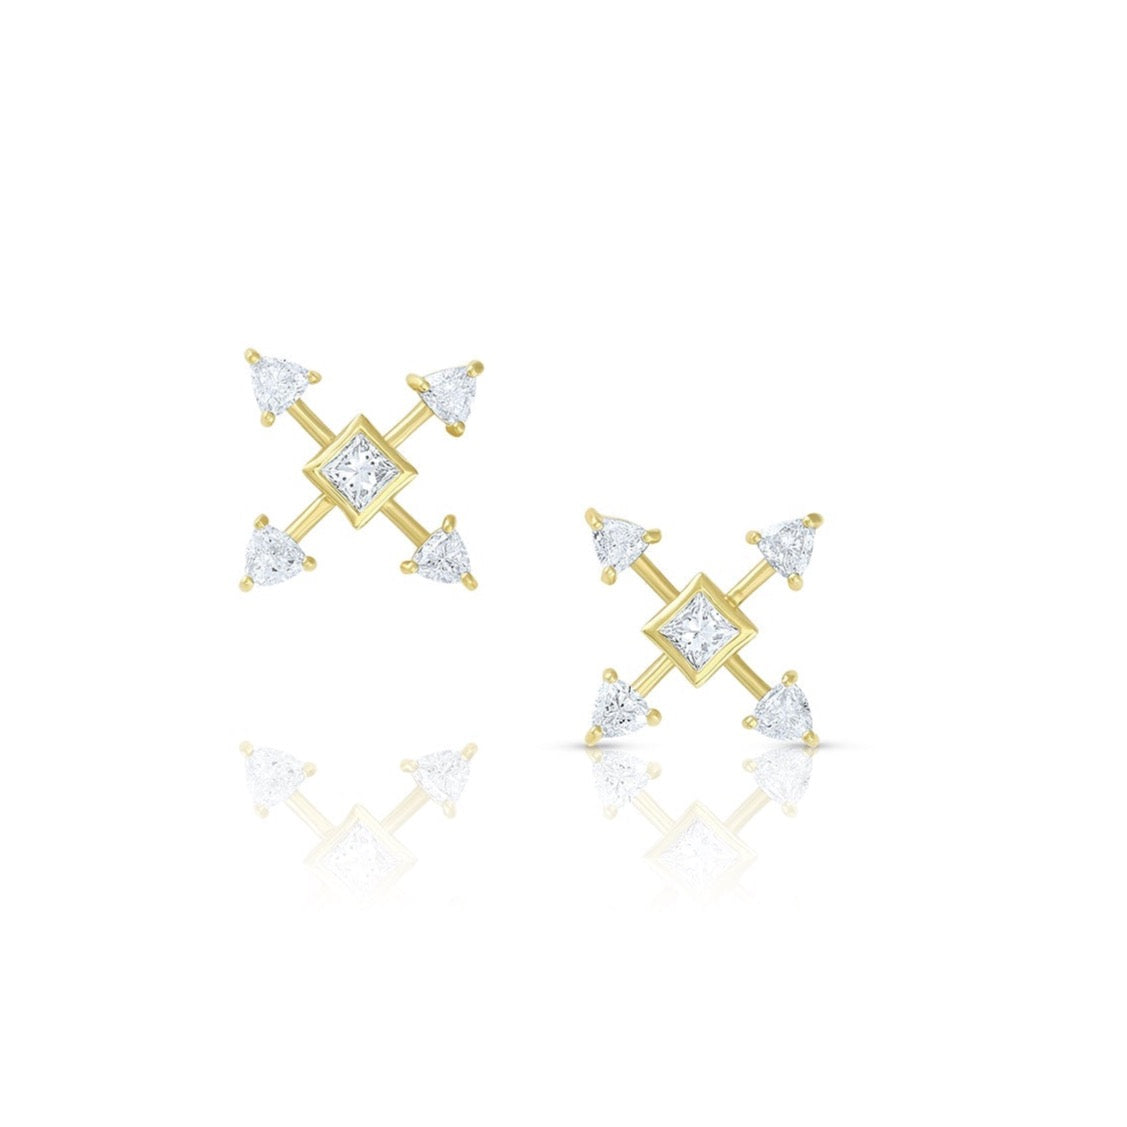 Pure Energy Post Earrings by Meredith Young available at Talisman Collection Fine Jewelers in El Dorado Hills, CA and online. The Pure Energy Post Earrings– a captivating ensemble of four trillion-cut diamonds encircling a central princess diamond, radiating light like a burst of sunshine. Crafted in the warmth of 18k yellow gold, these earrings come alive with a total of .32 carats of white diamonds. Pop them on, you'll see how they light up your look and turn heads!